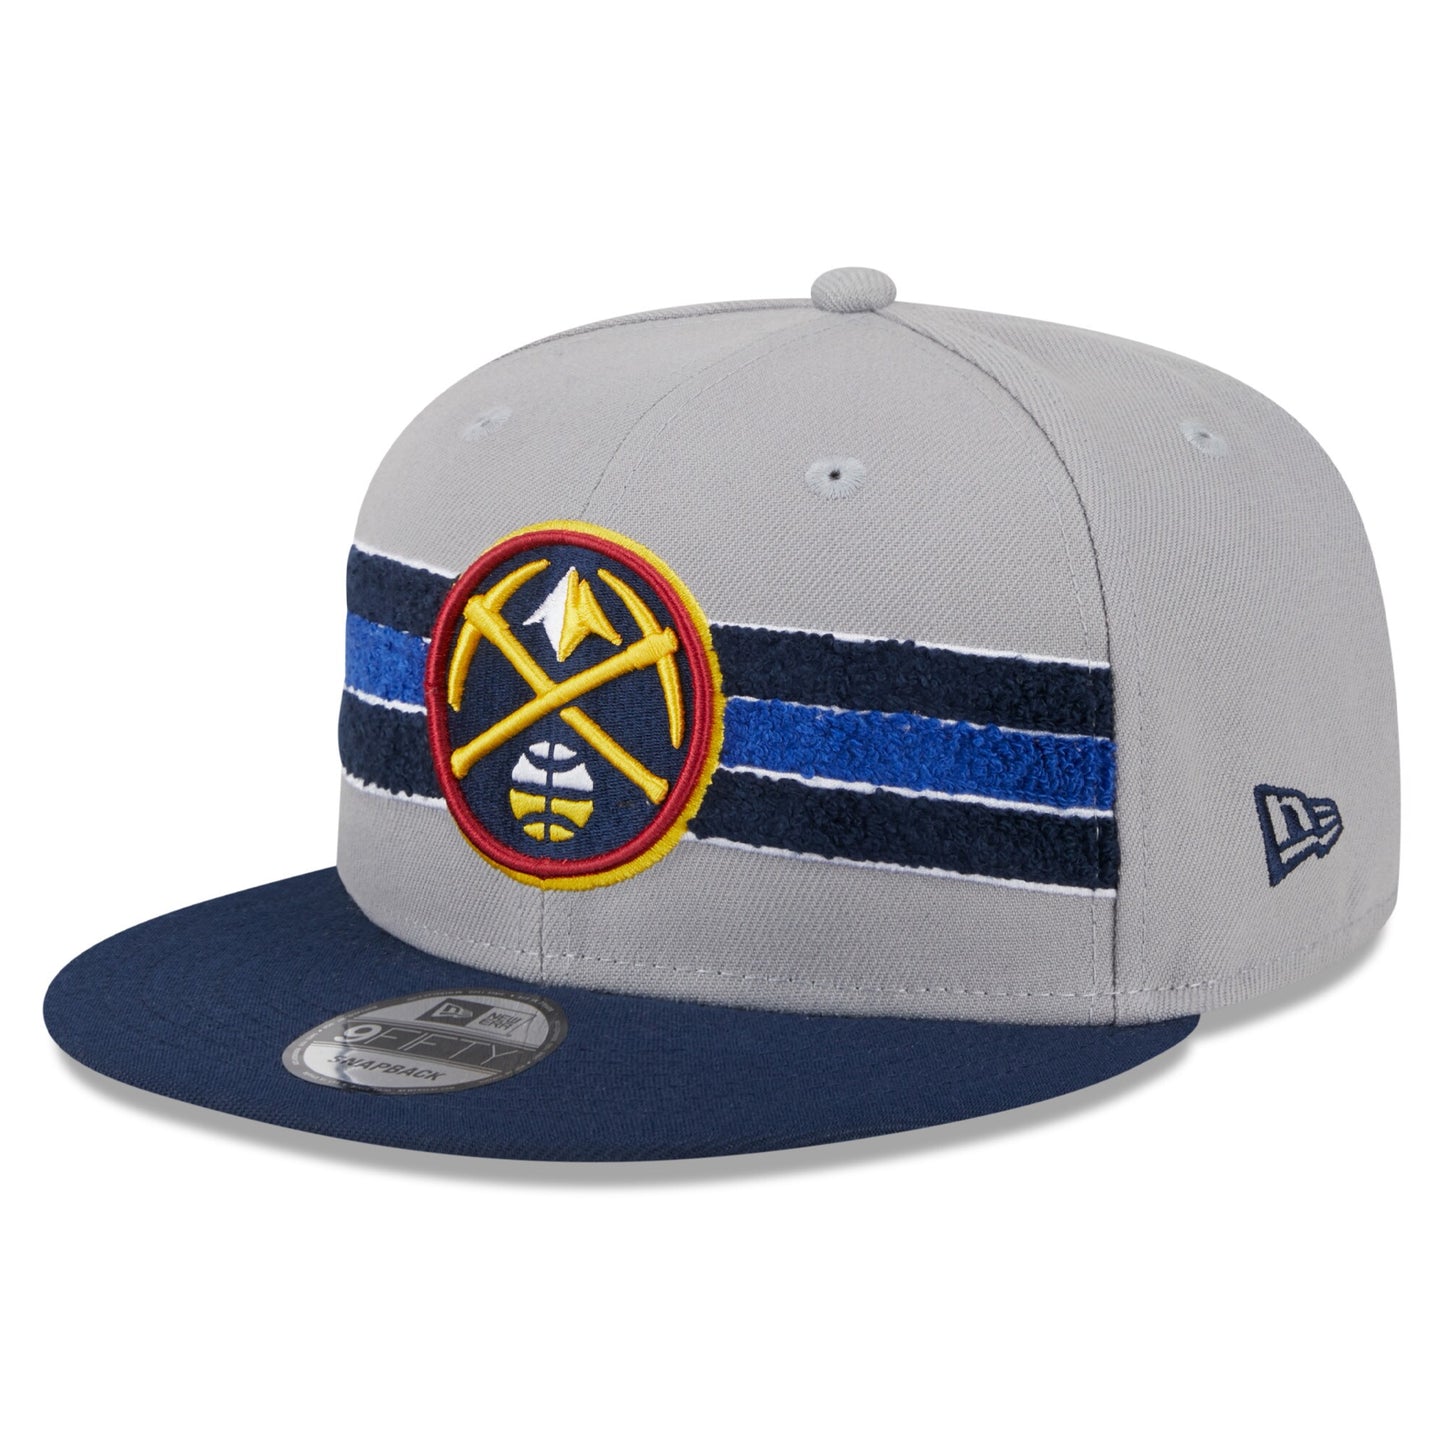 Denver Nuggets New Era Chenille Band 9FIFTY Snapback Hat - Gray